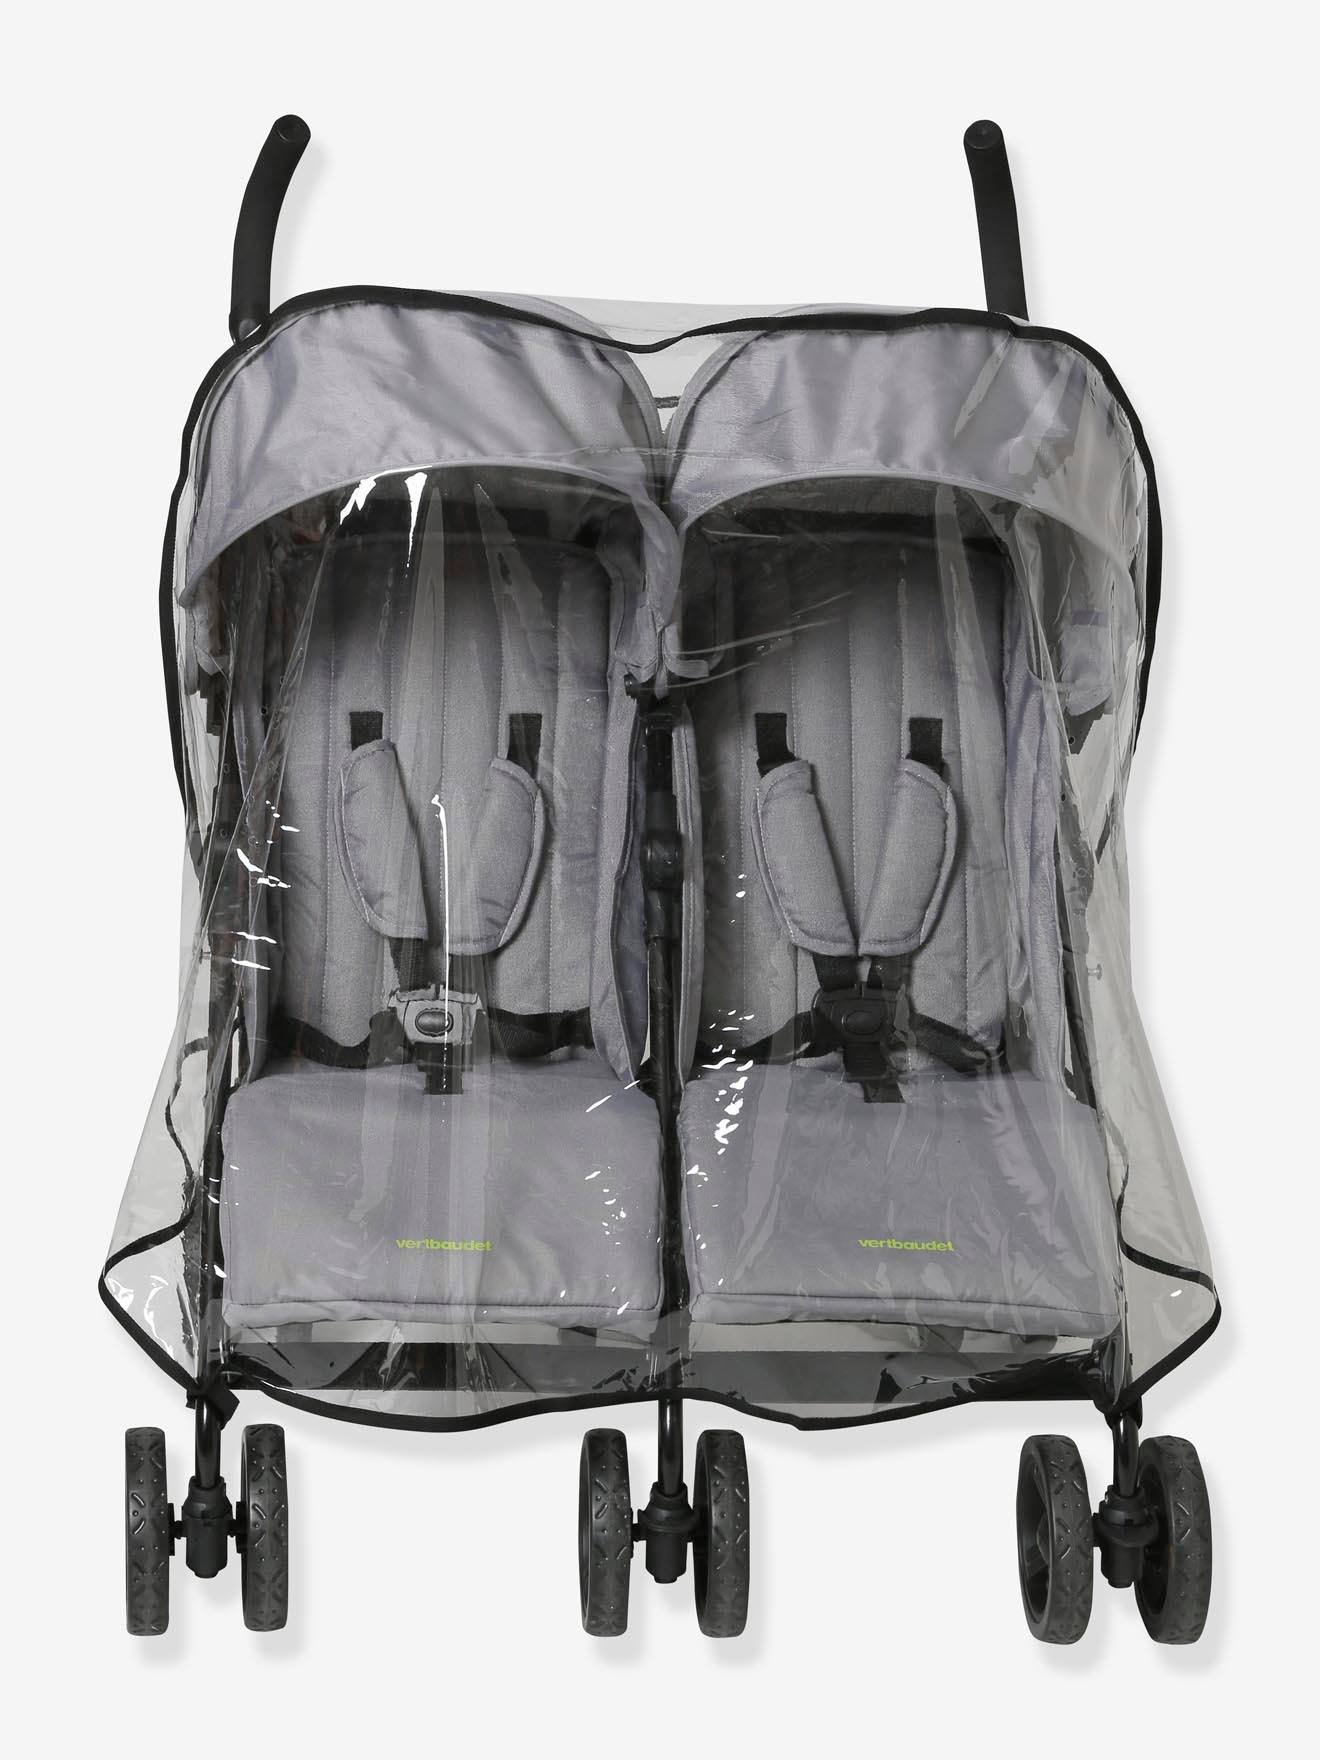 Universal Rain Cover For Baby Twin Stroller Double Front And Rear